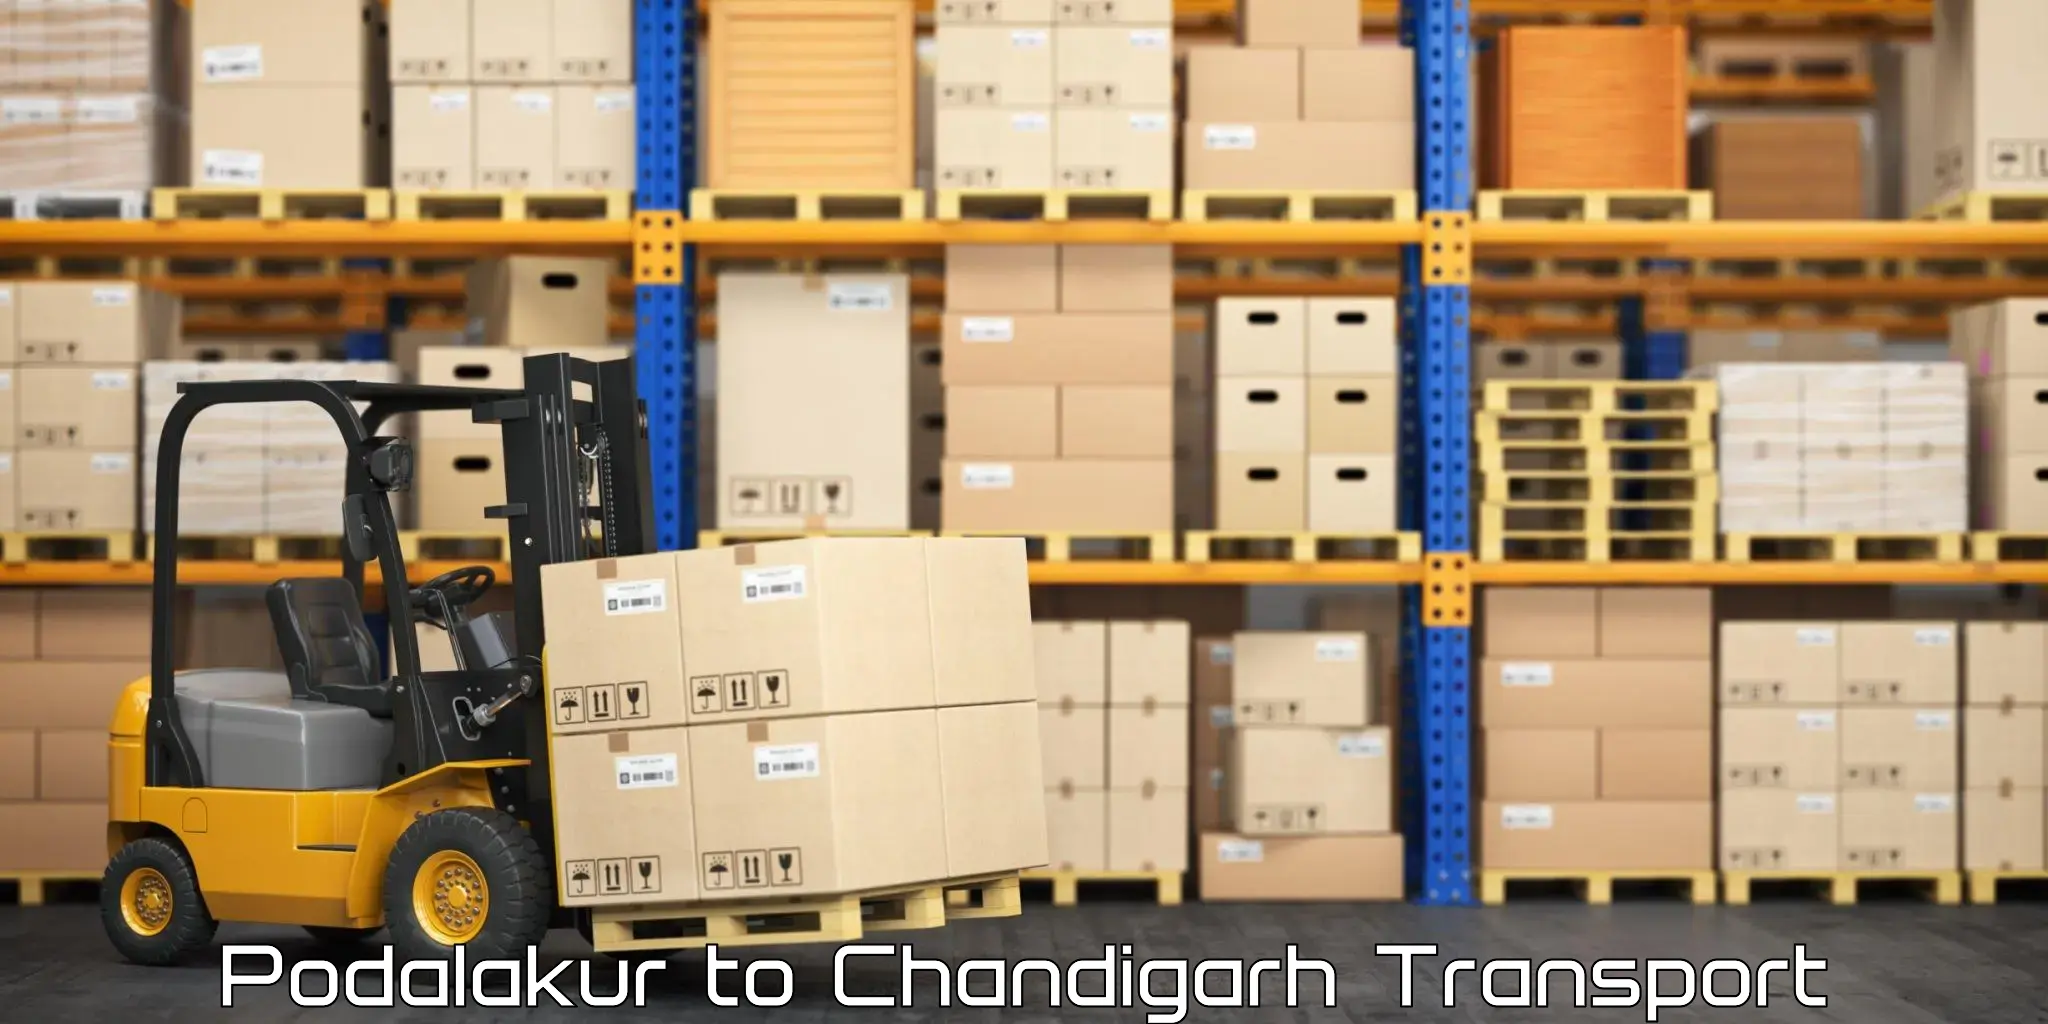 Daily transport service Podalakur to Chandigarh